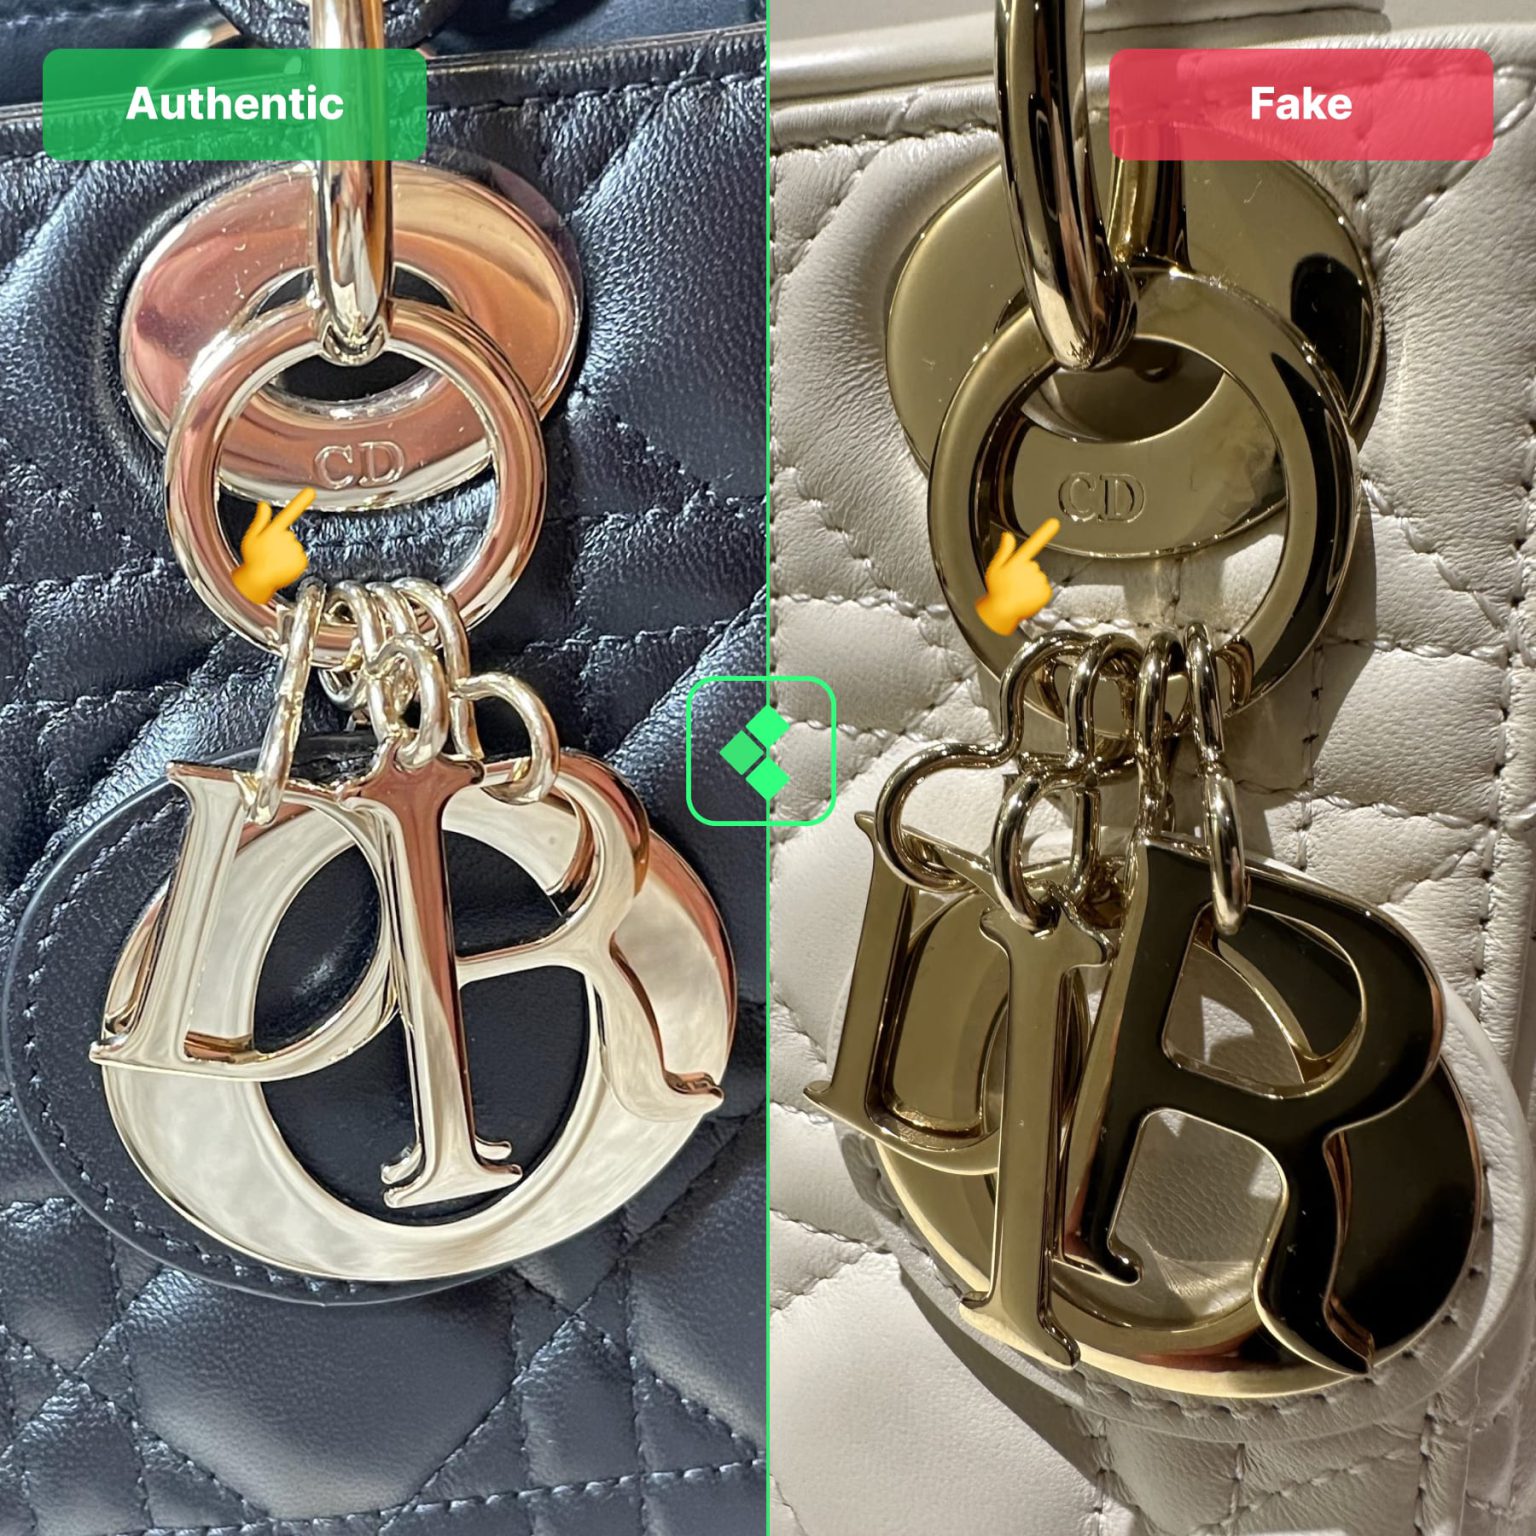 How to Spot a Fake Dior Bag - The Official Guide